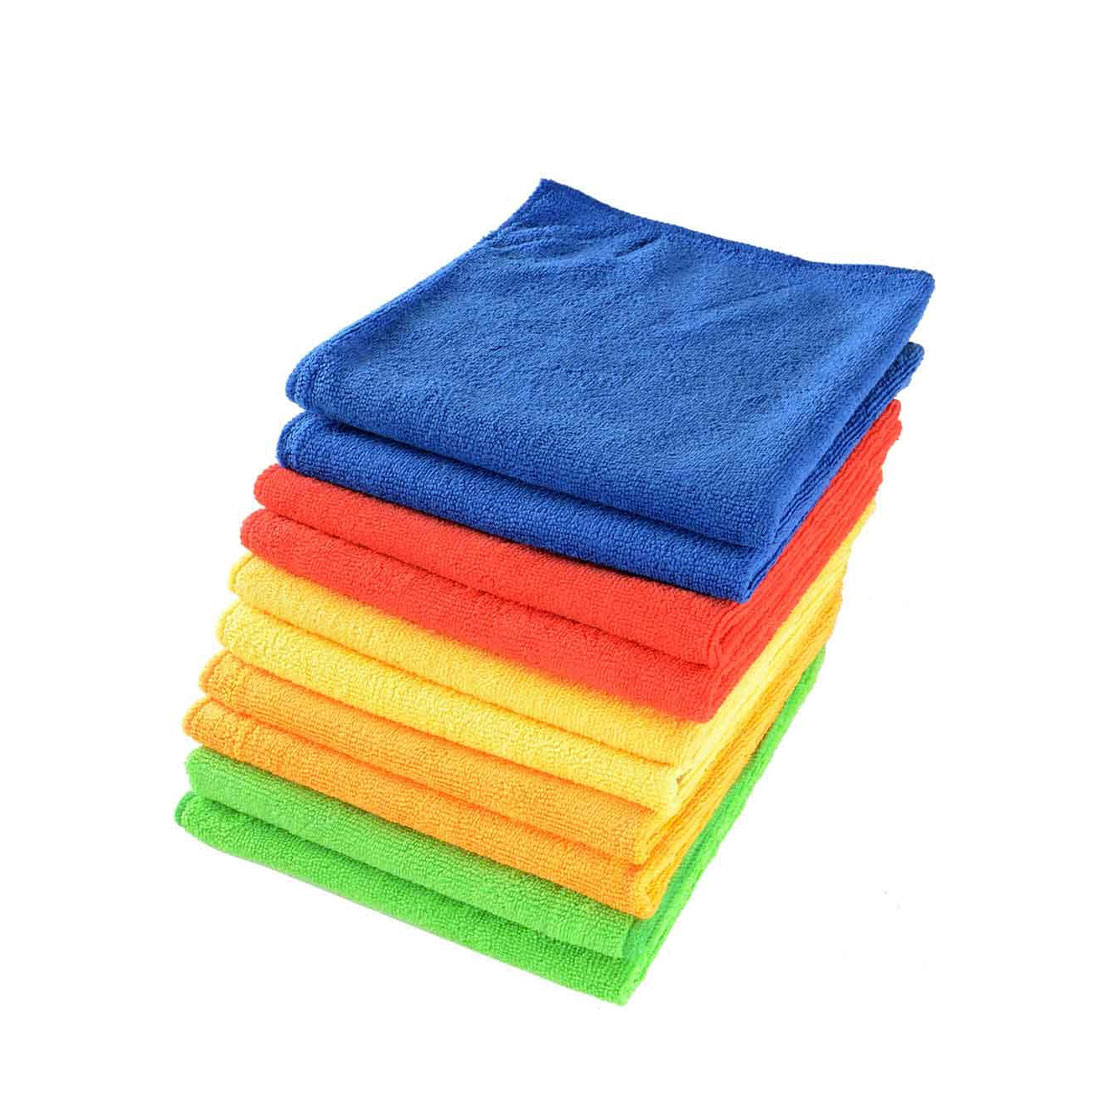 The Microfiber Cleaning Towel